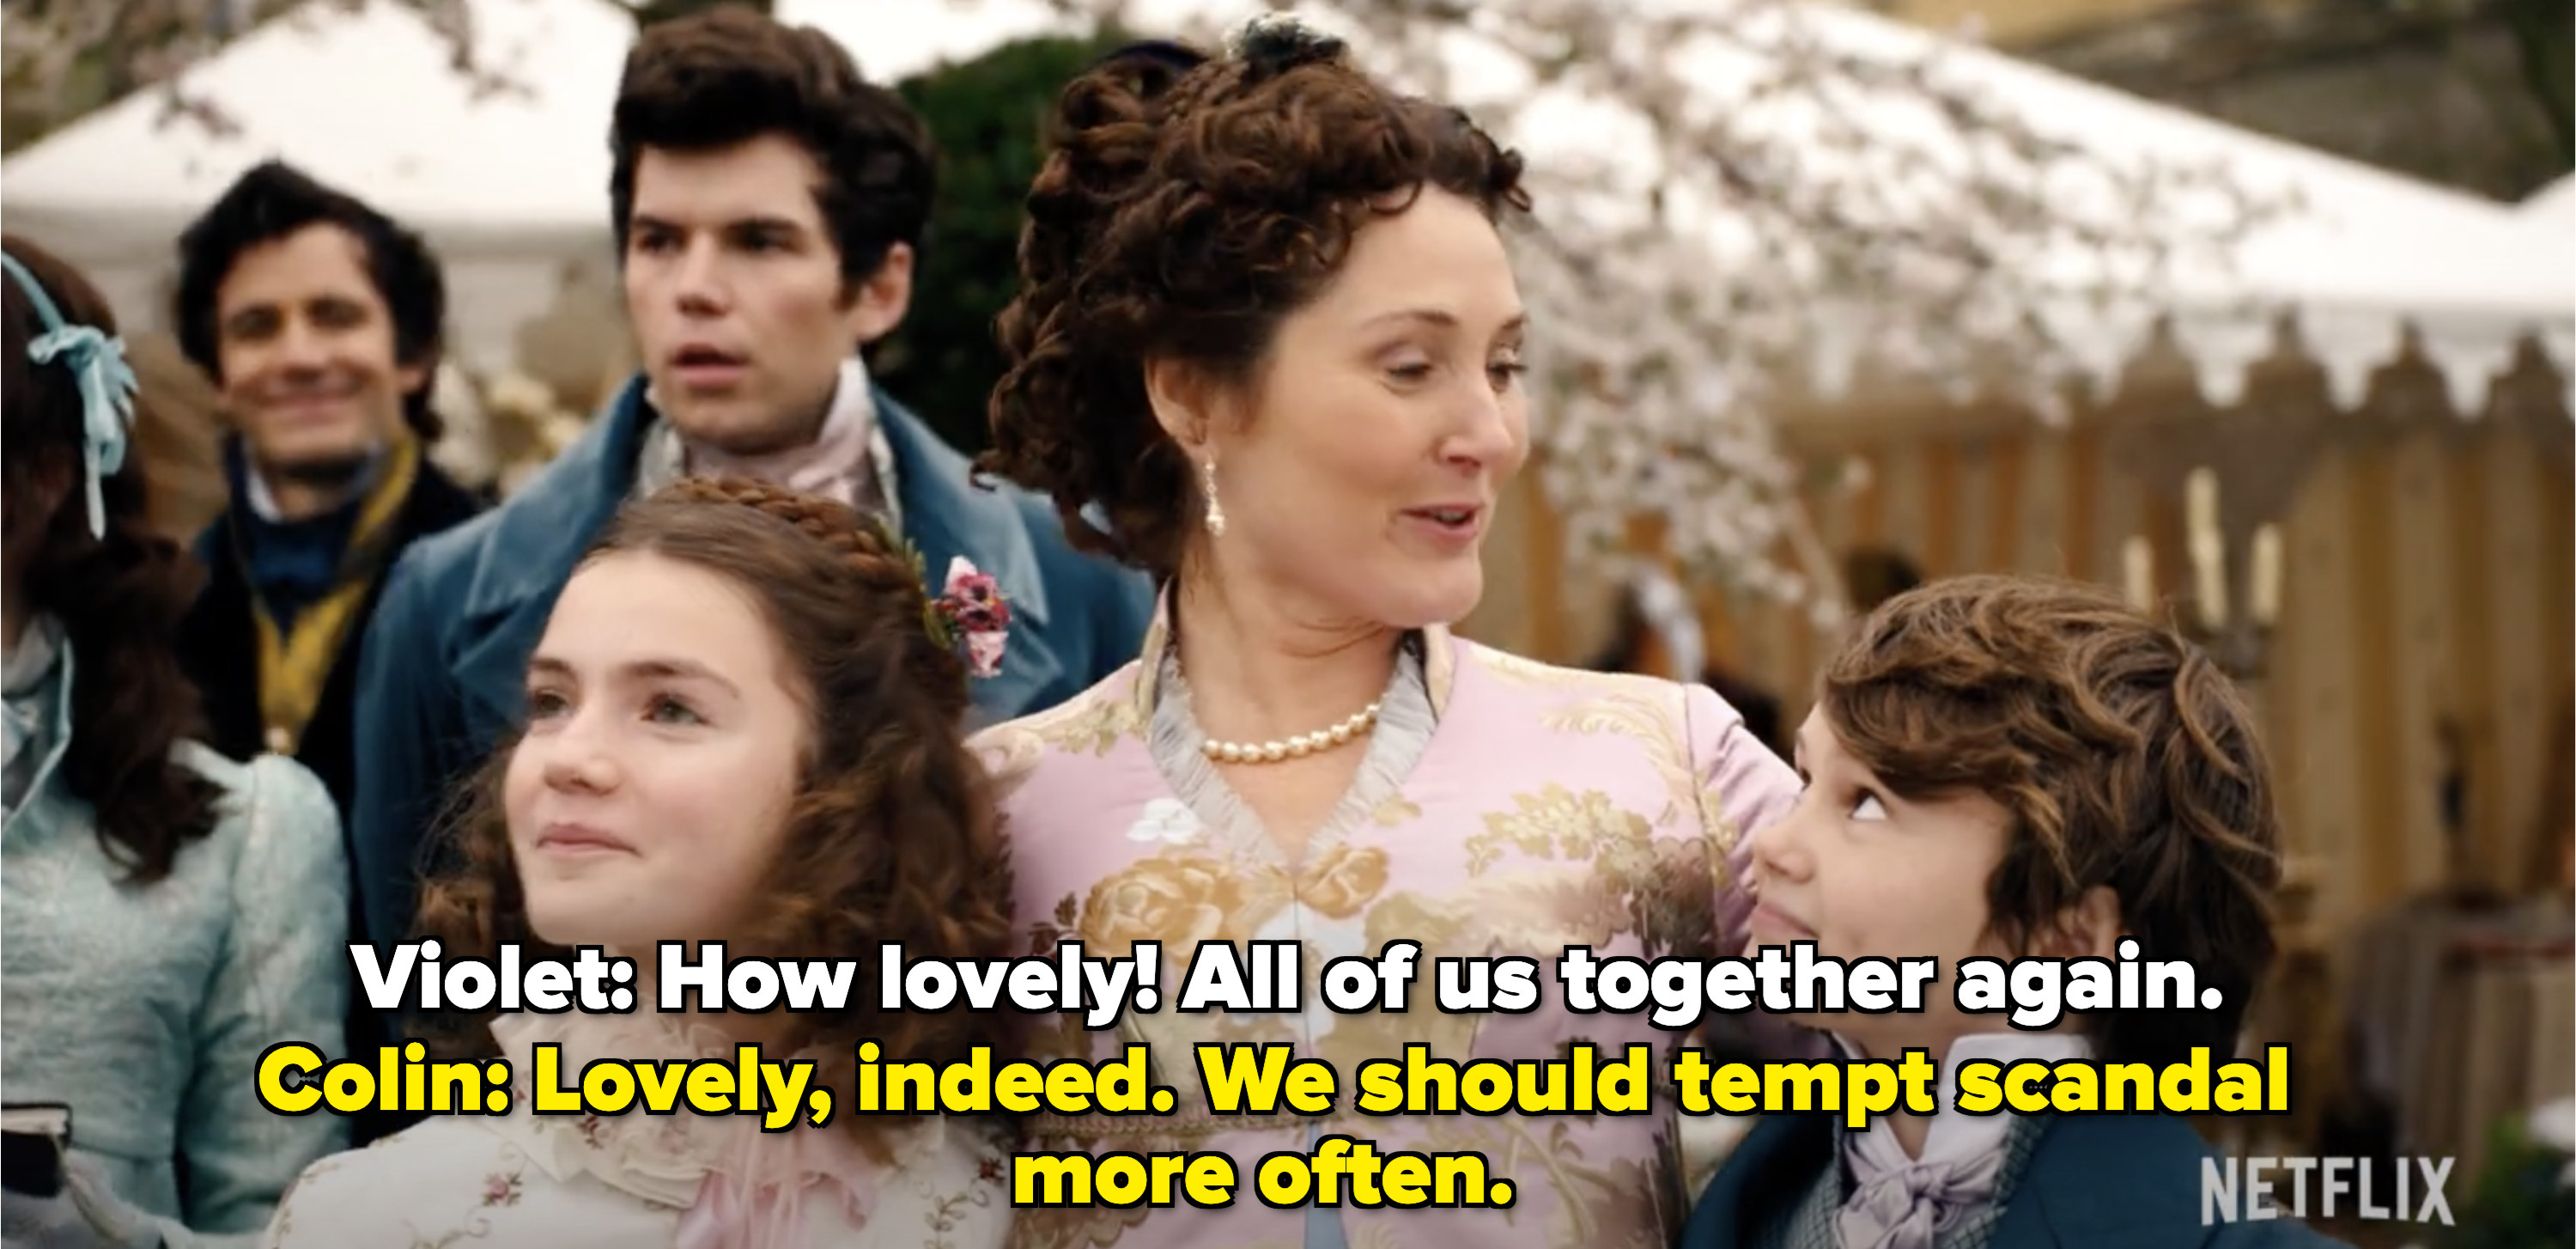 Violet Bridgerton surrounded by her family